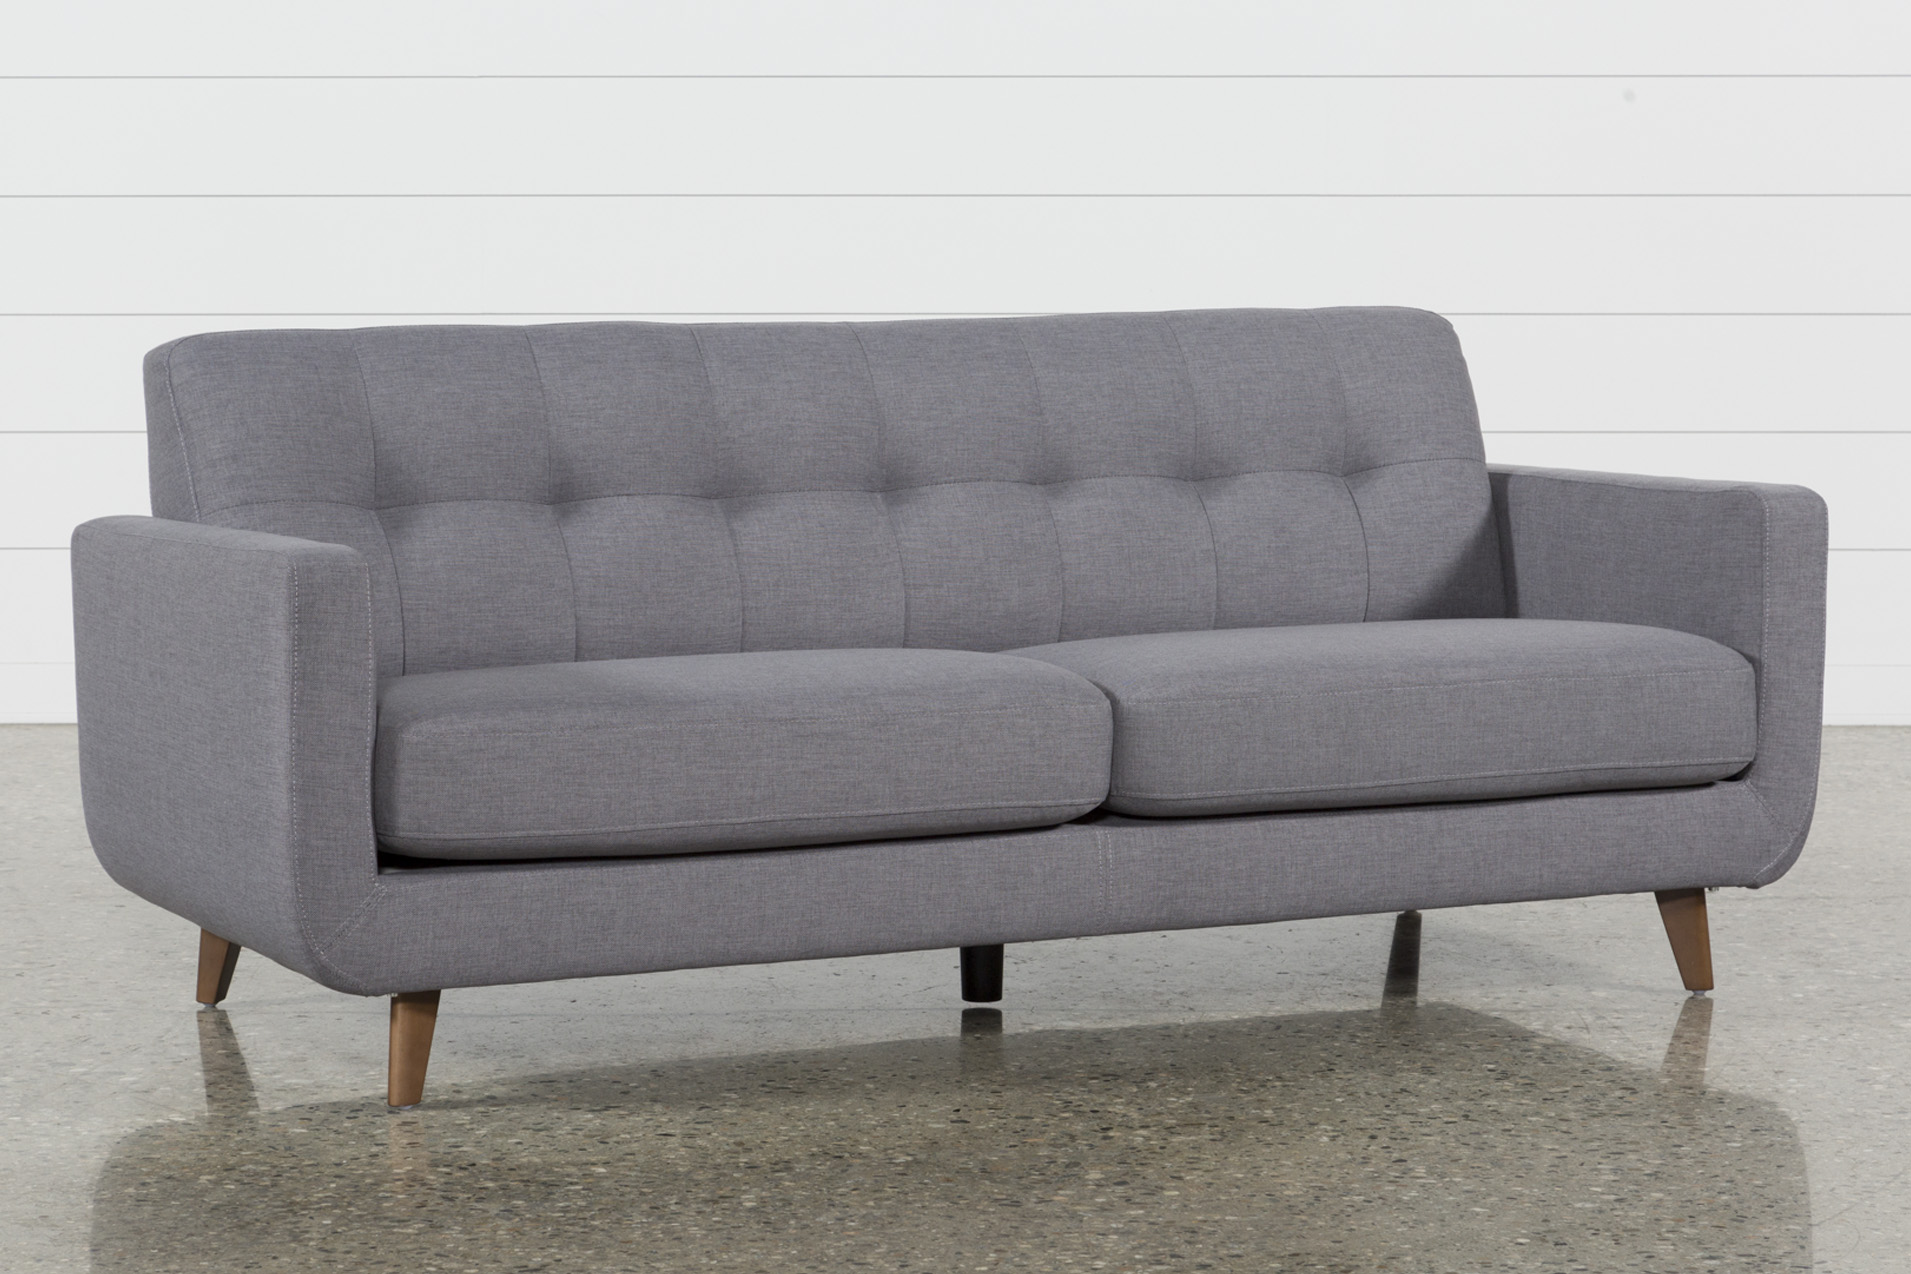 5 reasons why you should buy grey sofas